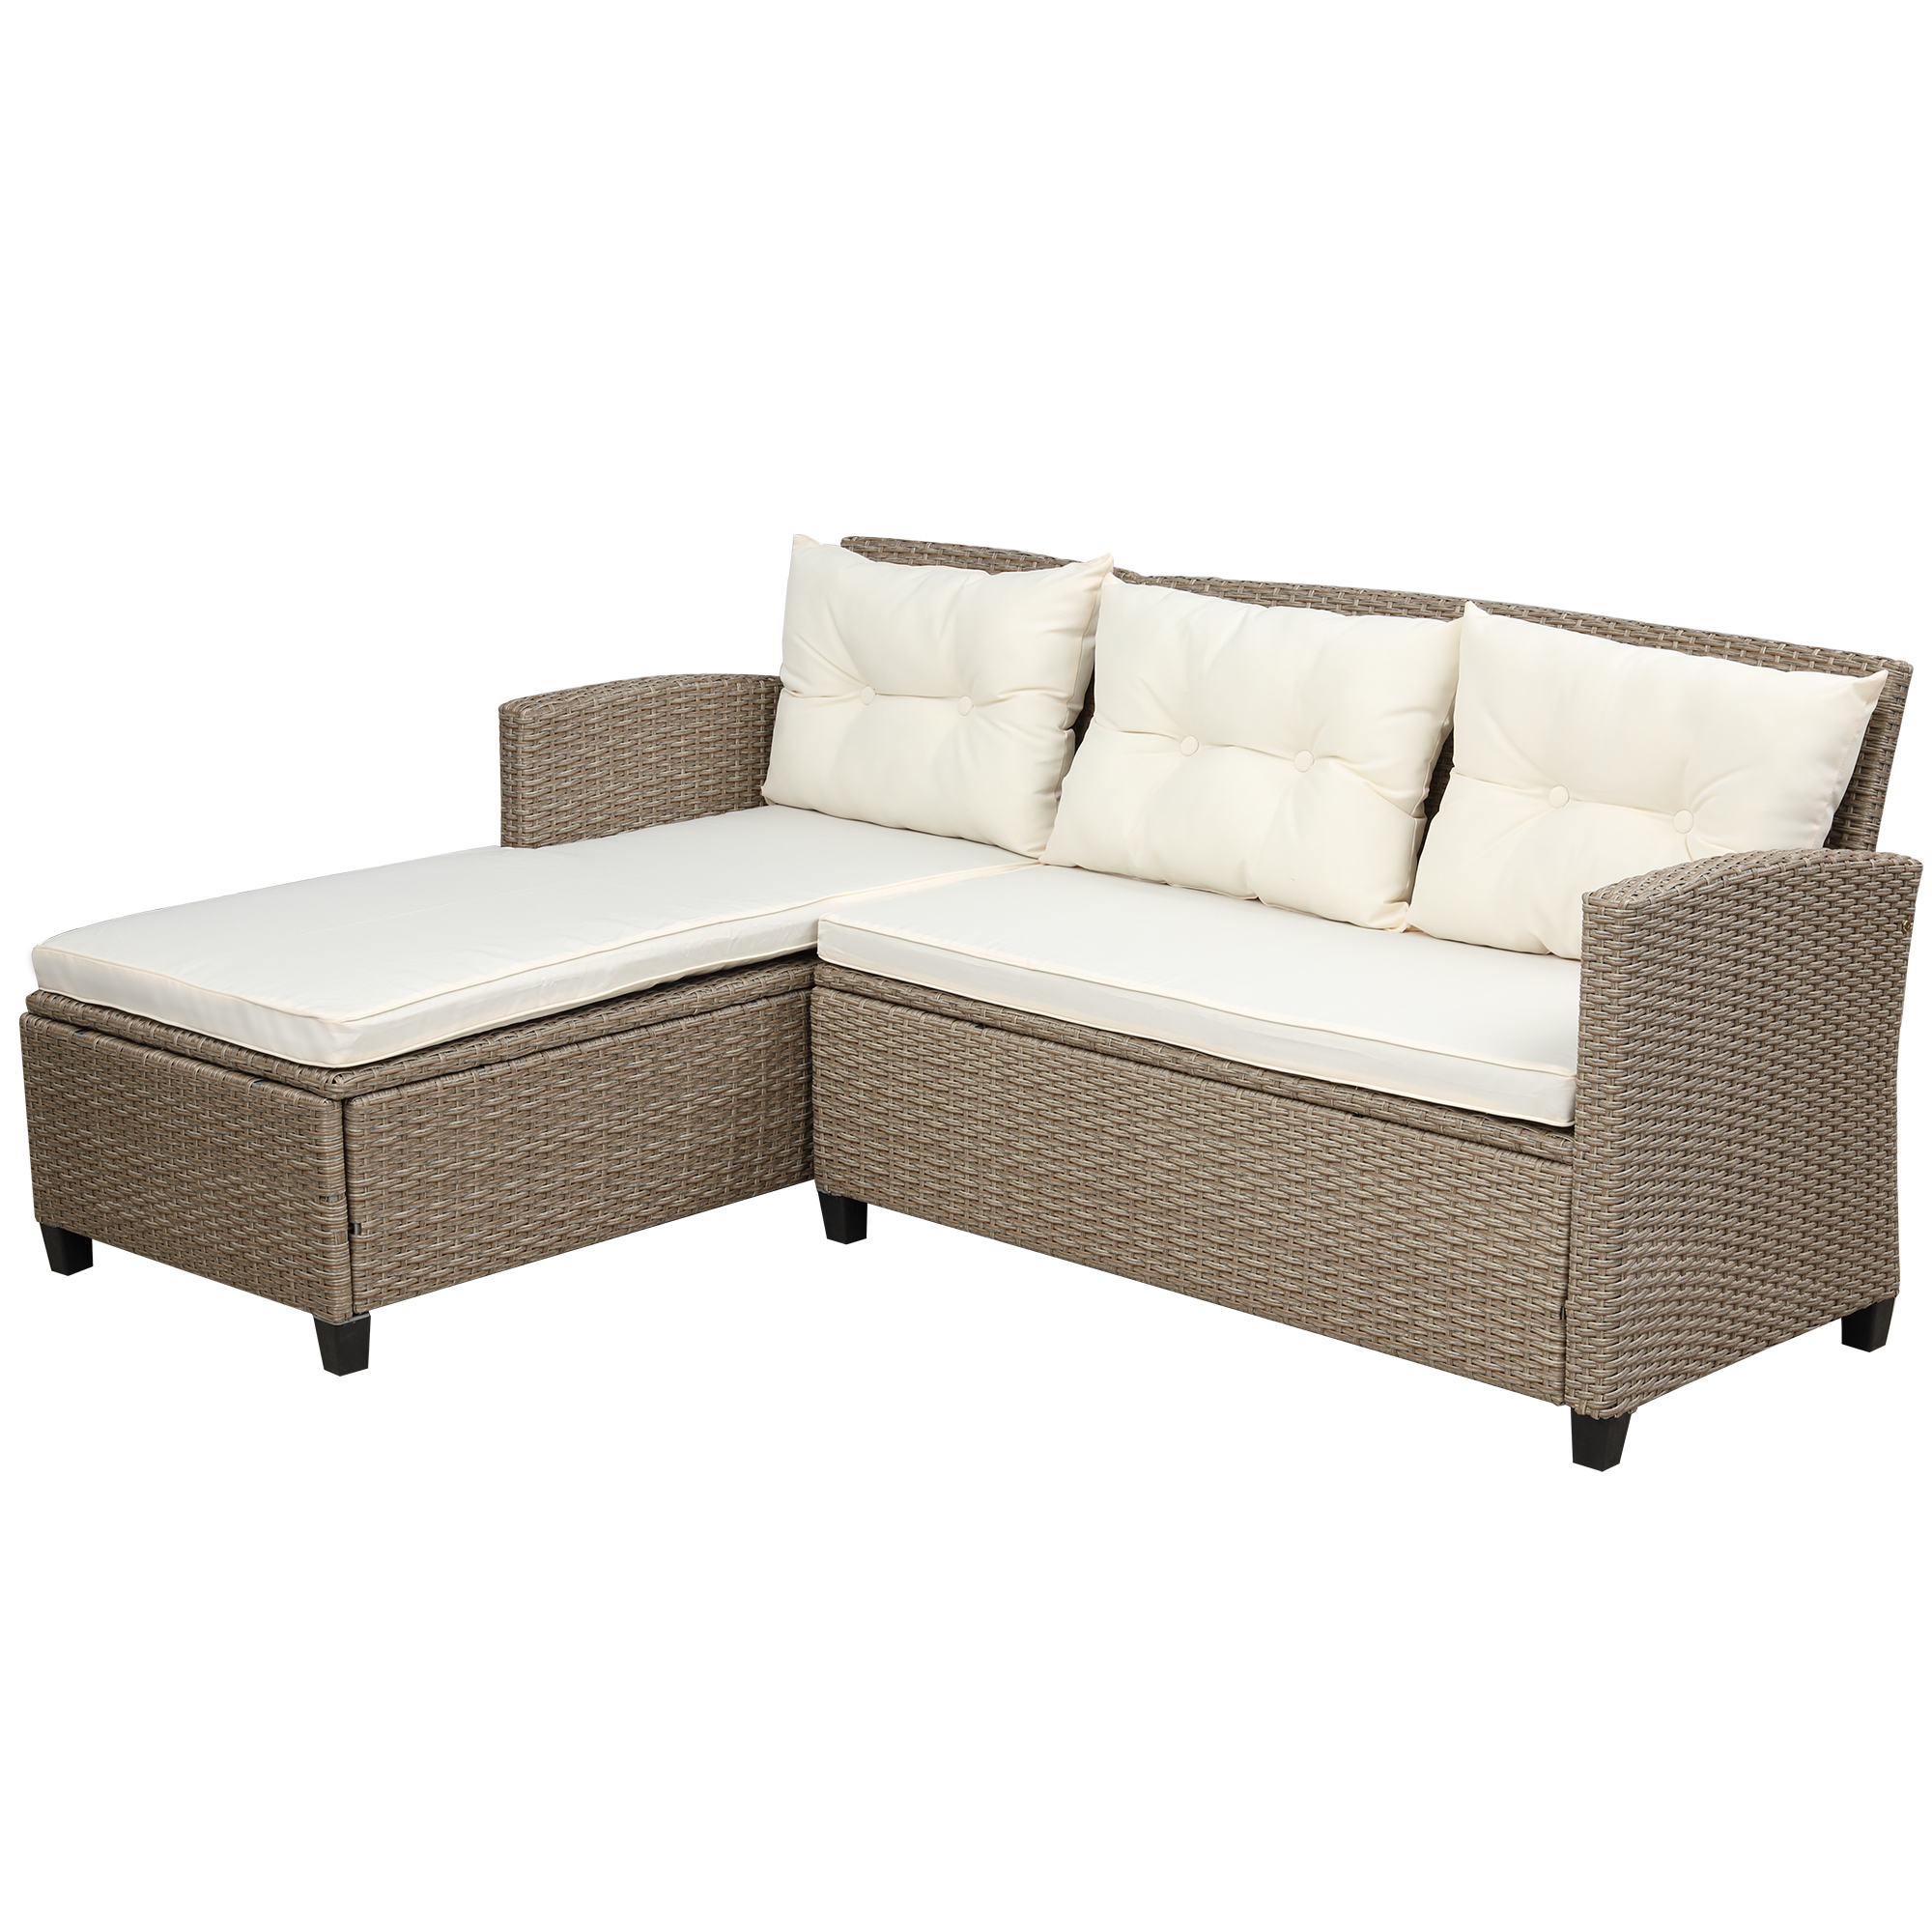 Patio Rattan Sofa Sets, YOFE 4 Piece Outdoor Patio Furniture Set, Wicker Deck Patio Furniture Dining Sets, Patio Sectional Sofa Sets with Beige Cushions, Outdoor Patio Set for Garden, Poolside, R1763 - image 3 of 7